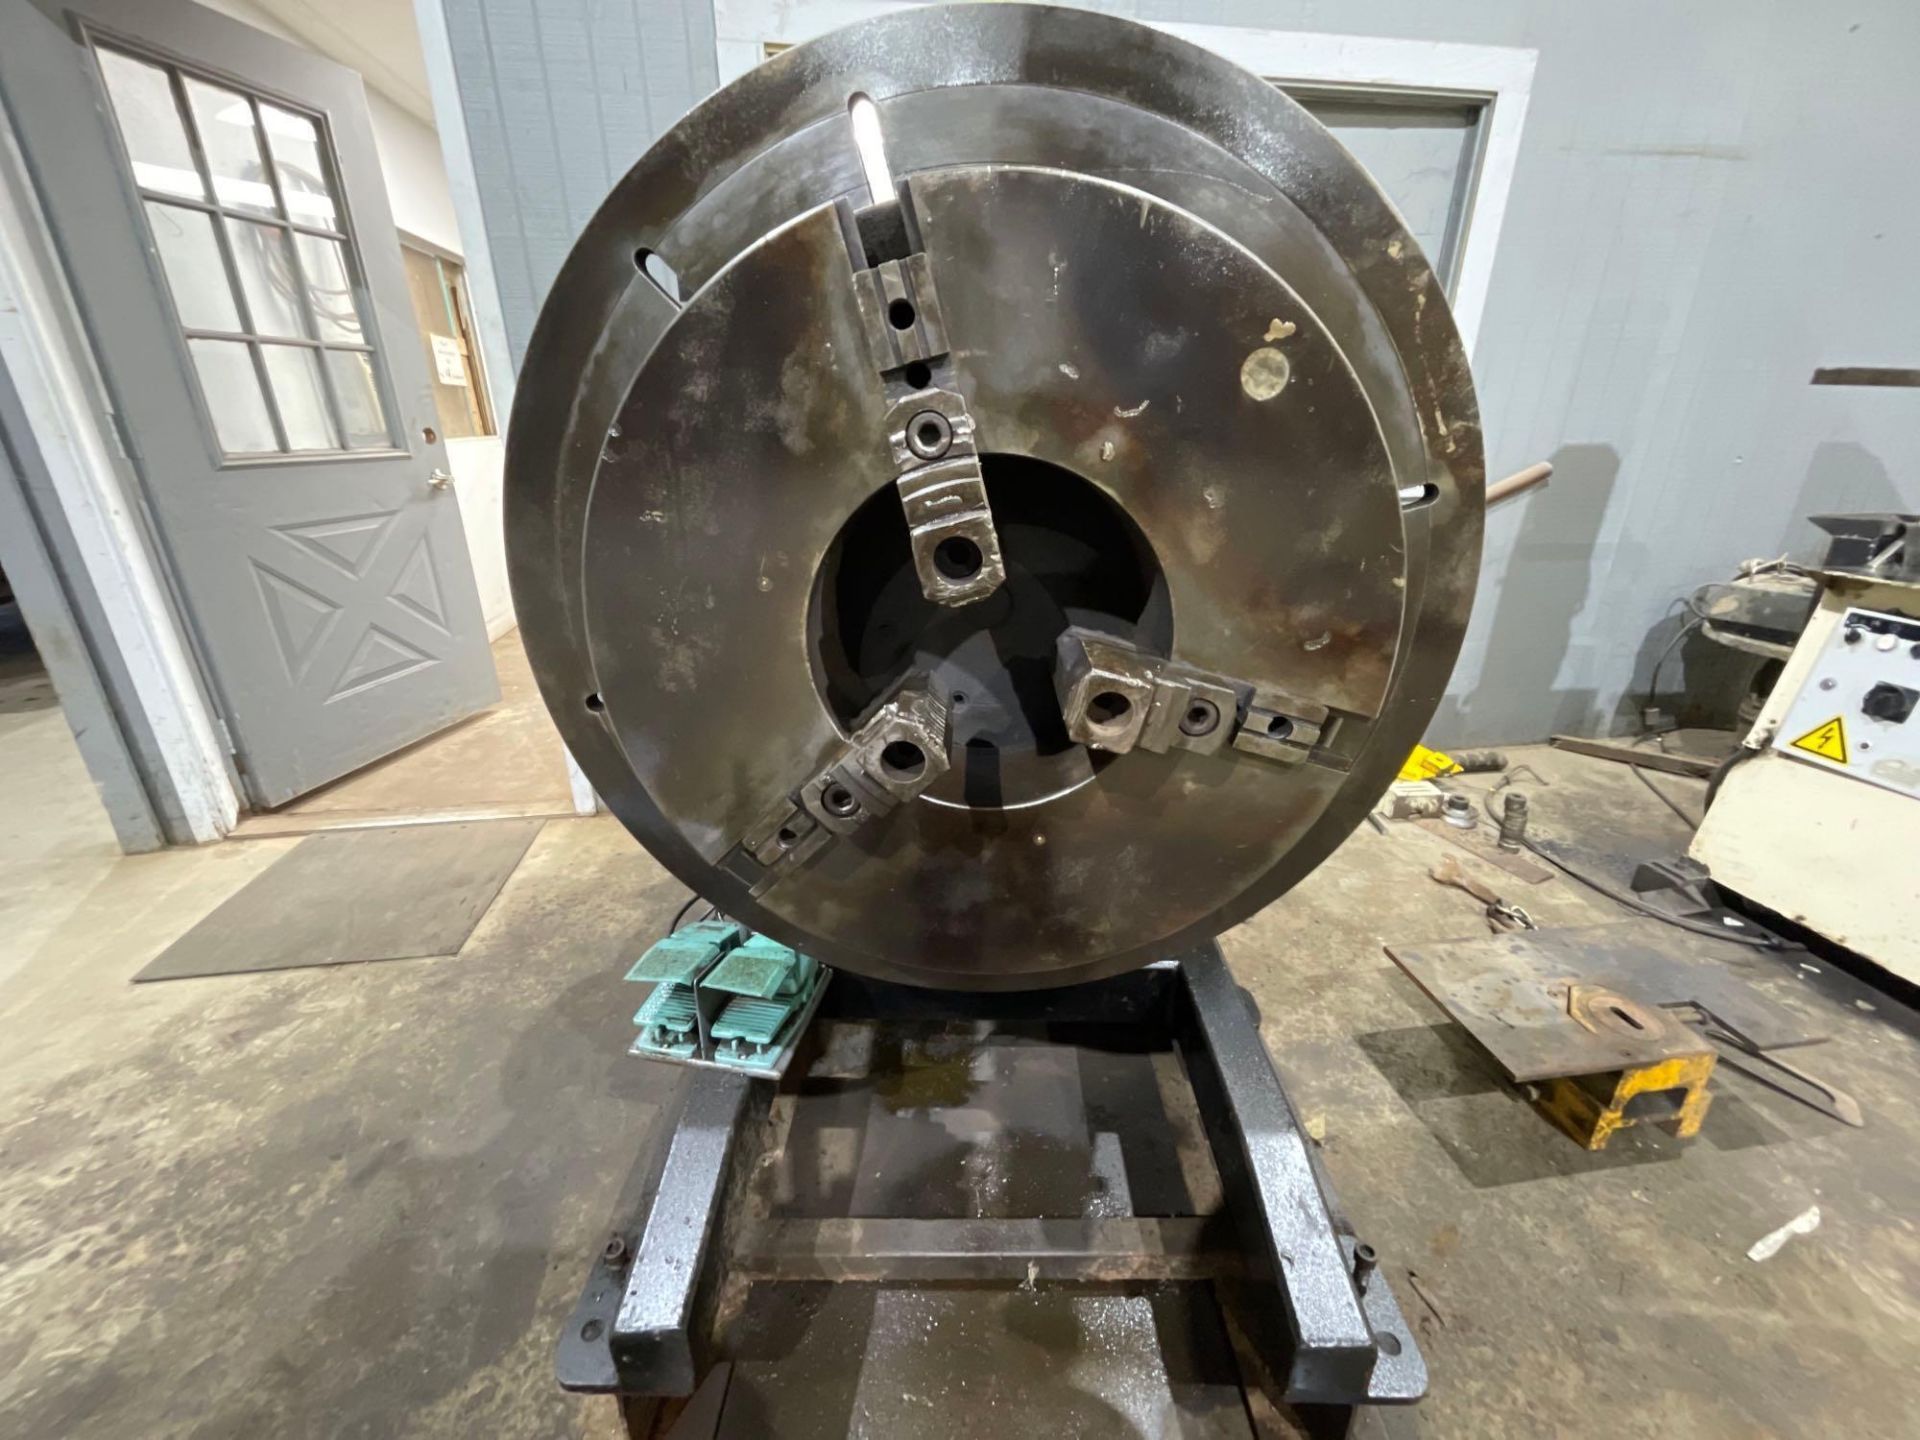 Profax Model WP-2000-2 Welding Positioner, with 25” 3-Jaw Chuck - Image 9 of 9